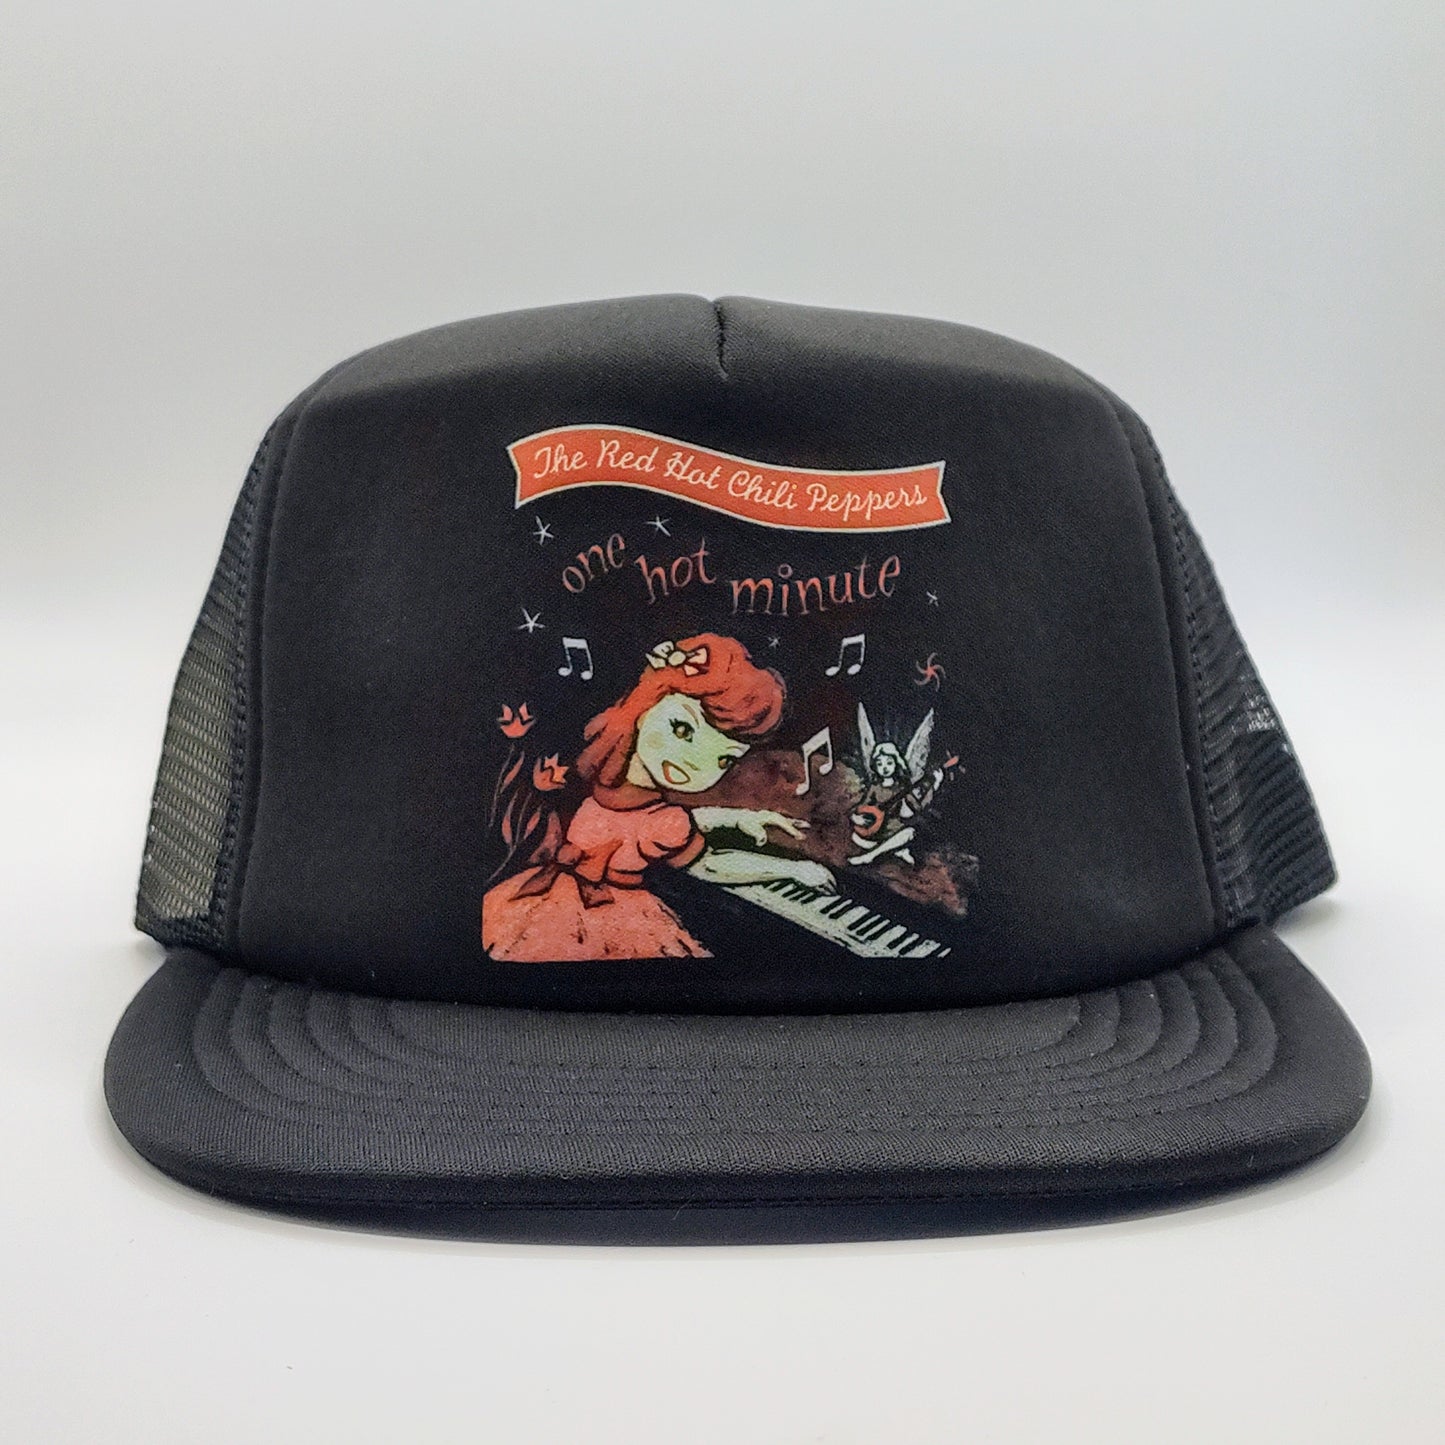 Red Hot Chili Peppers - One Hot Minute Trucker Hat